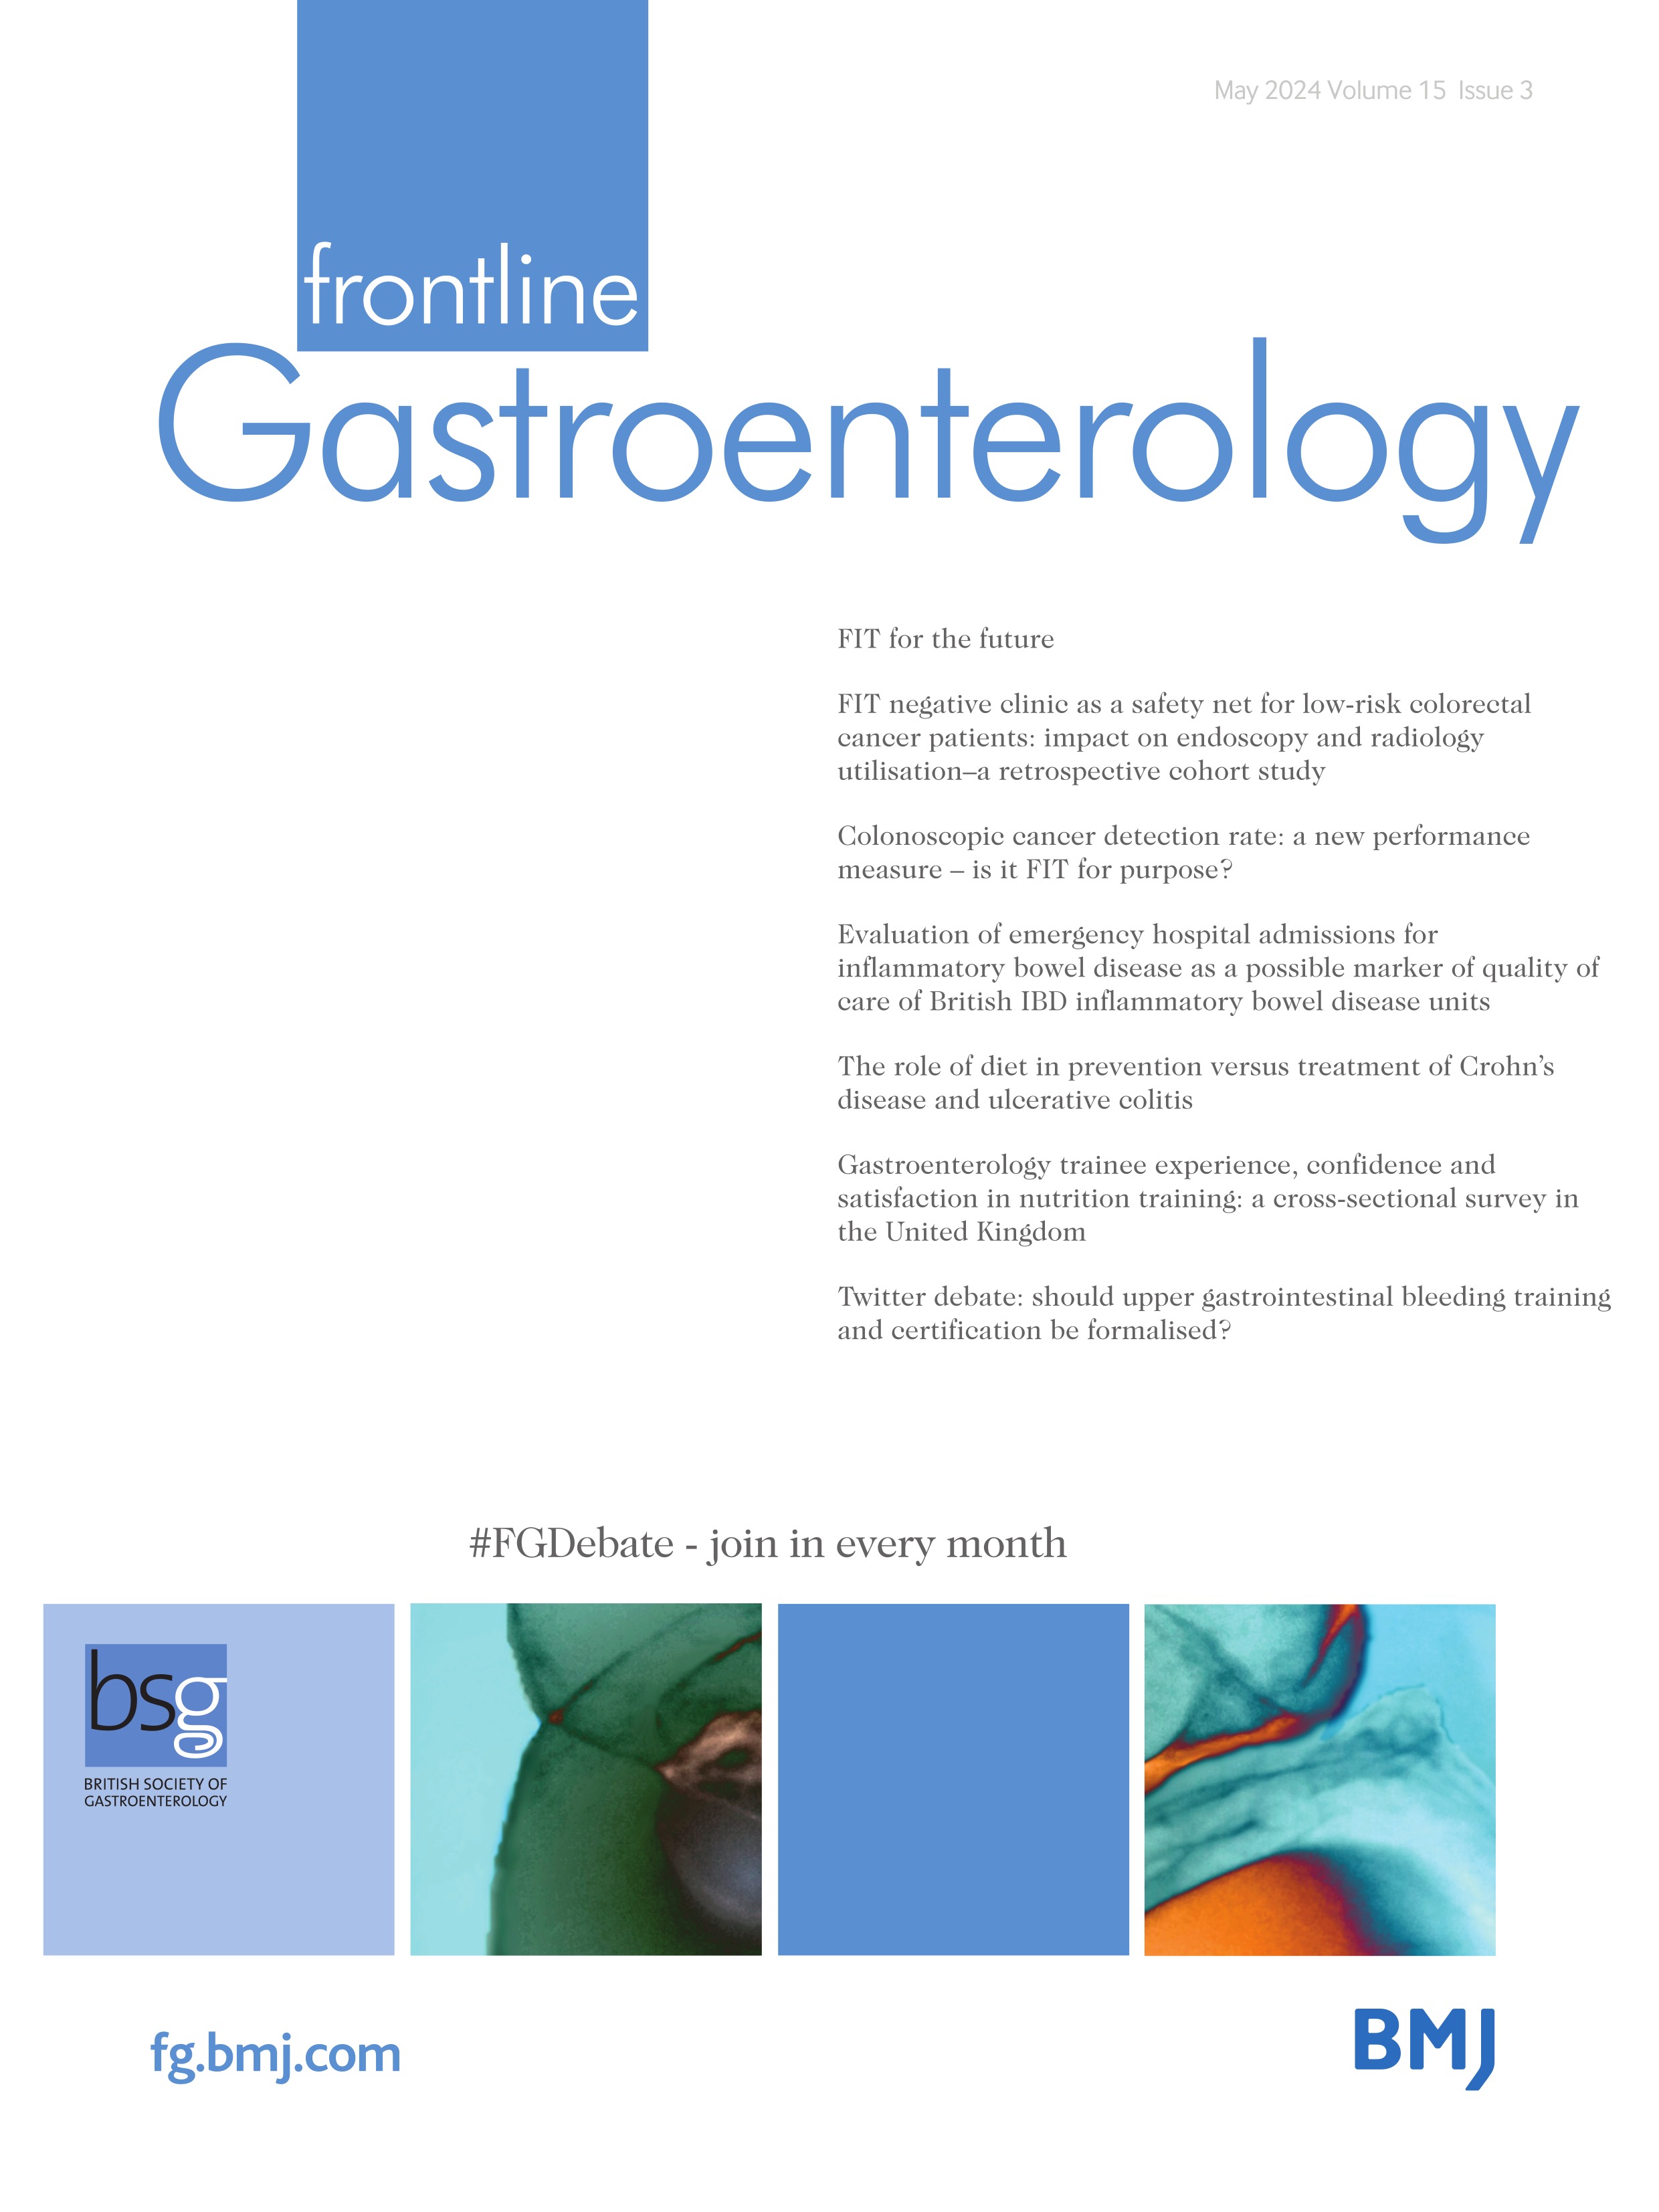 Re: 'Dedicated service for Barretts oesophagus surveillance endoscopy yields higher dysplasia detection and guideline adherence in a non-tertiary setting in the UK: a 5-year comparative cohort study by Ratcliffe et al